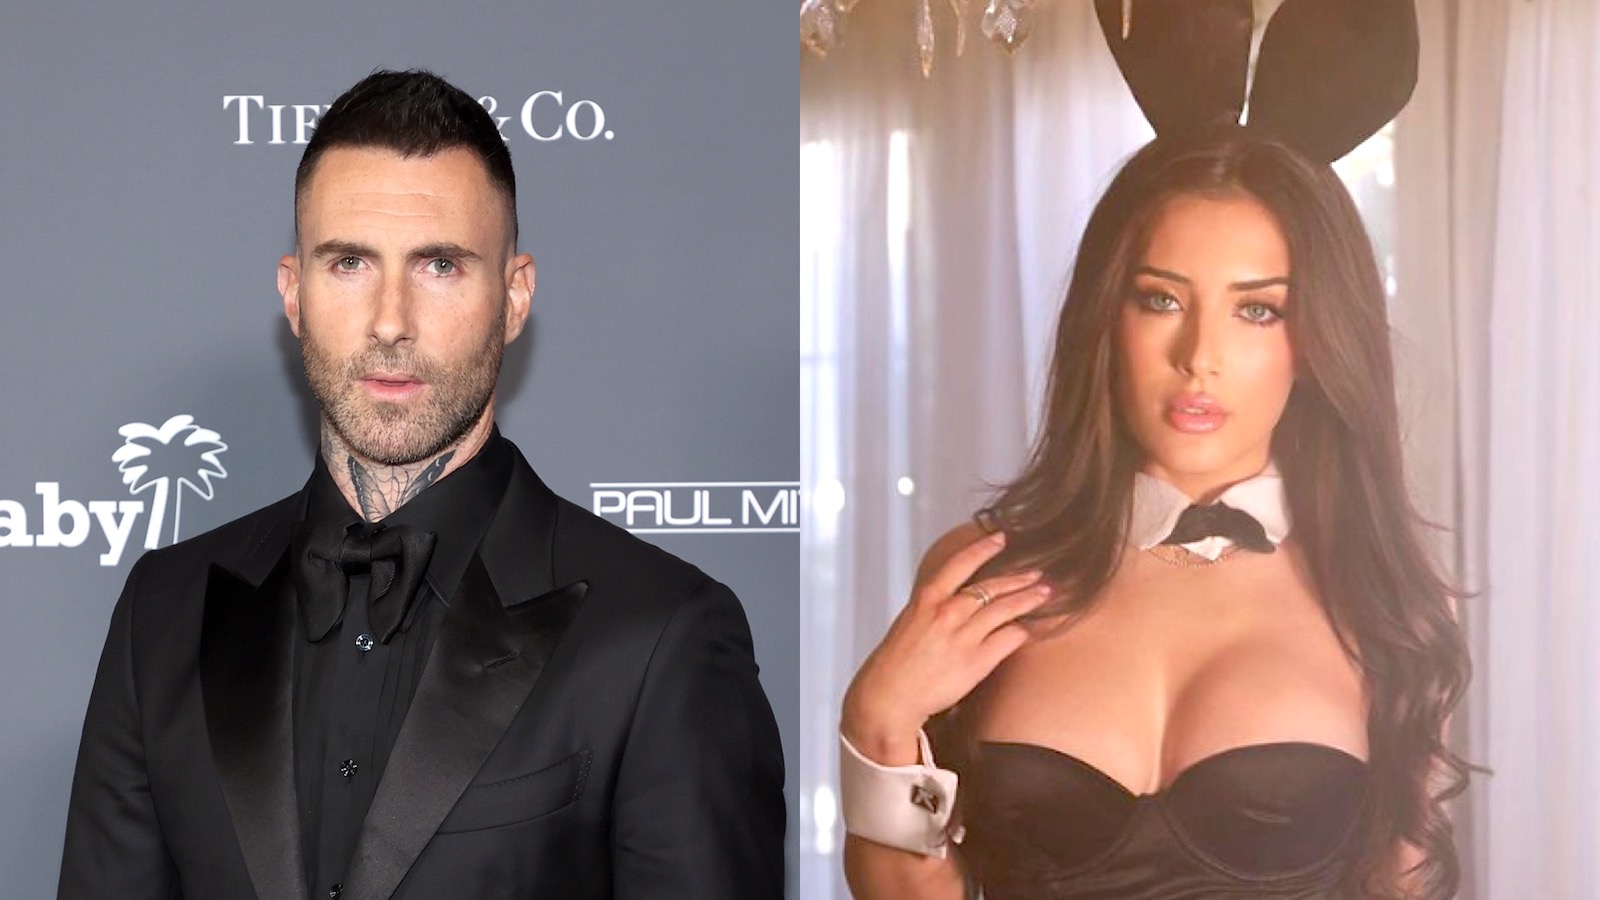 (L) Adam Levine wearing an all-black suit, (R) Sumner Stroh wearing a playboy bunny outfit